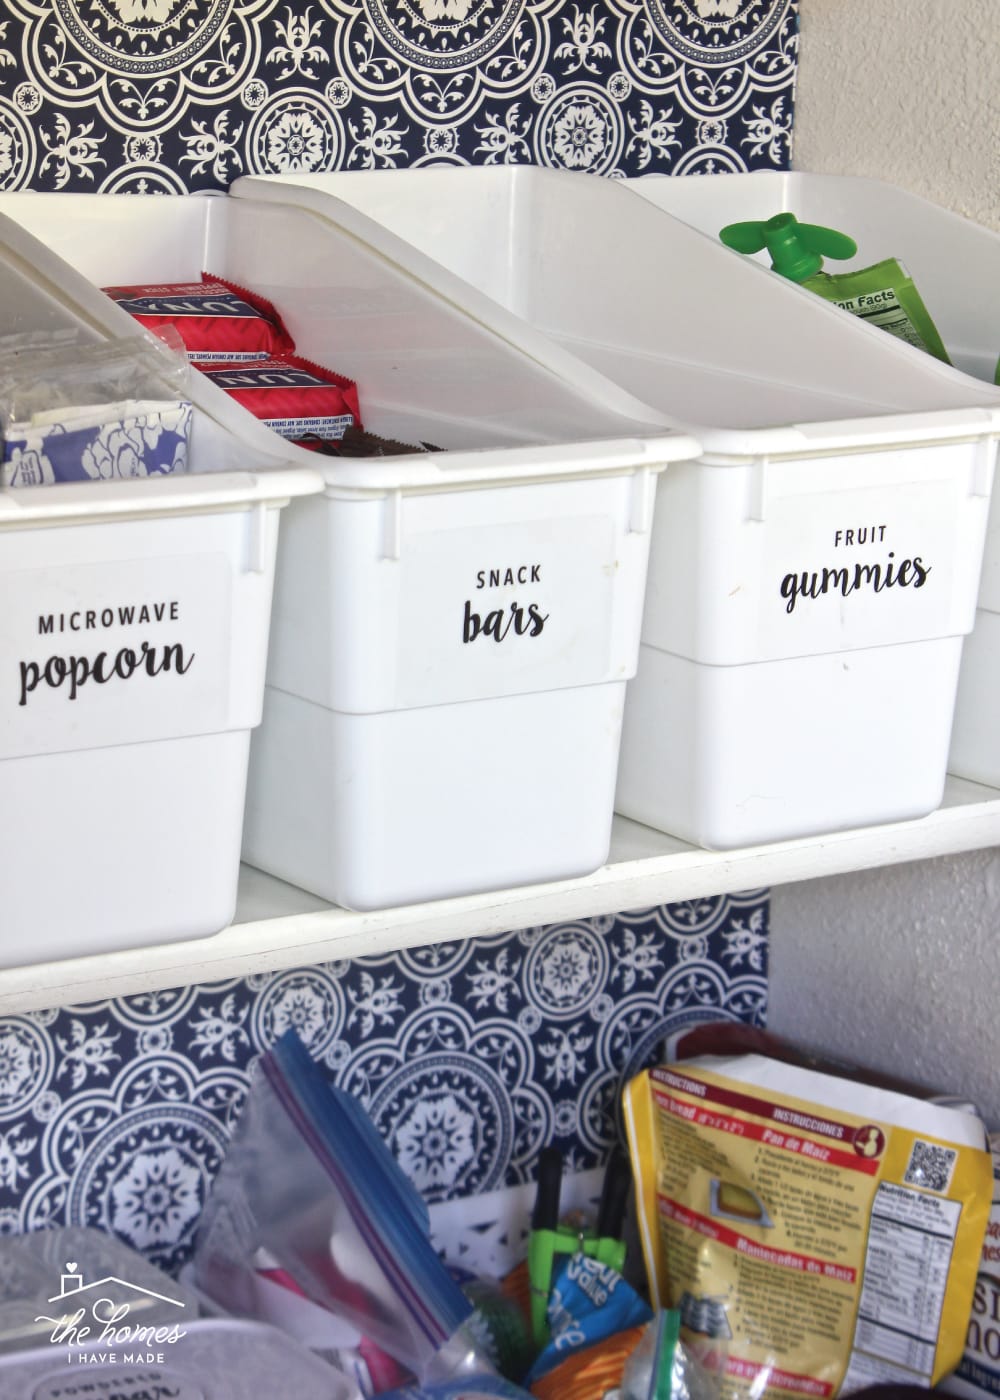 https://thehomesihavemade.com/a-tour-of-our-organized-pantry-from-top-to-bottom/a-tour-of-our-organized-pantry-from-top-to-bottom_14/